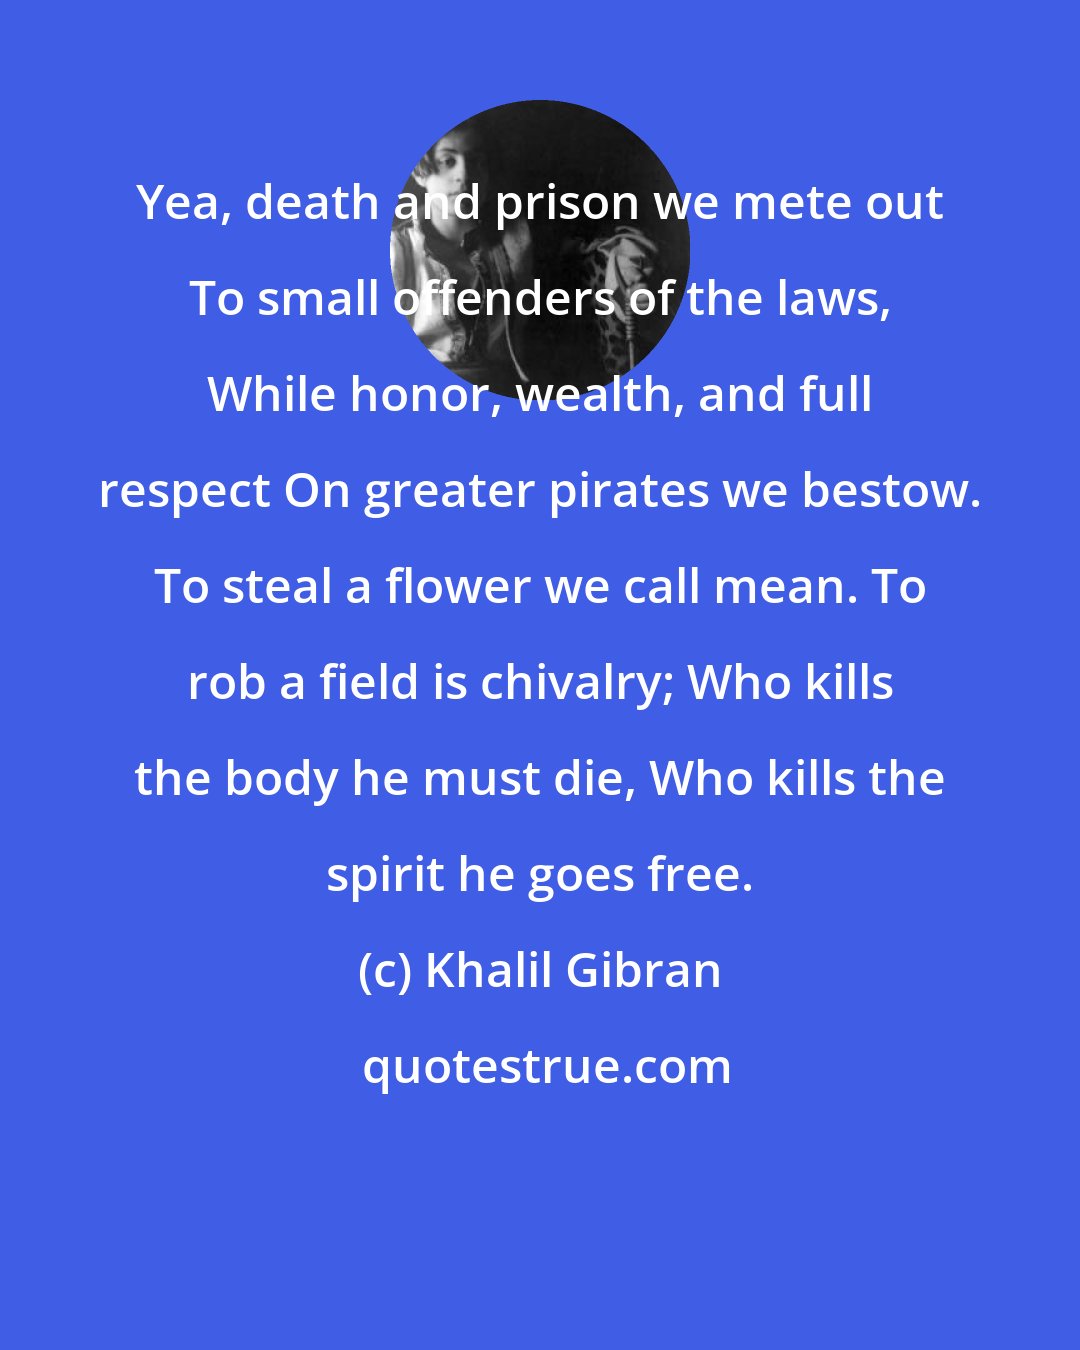 Khalil Gibran: Yea, death and prison we mete out To small offenders of the laws, While honor, wealth, and full respect On greater pirates we bestow. To steal a flower we call mean. To rob a field is chivalry; Who kills the body he must die, Who kills the spirit he goes free.